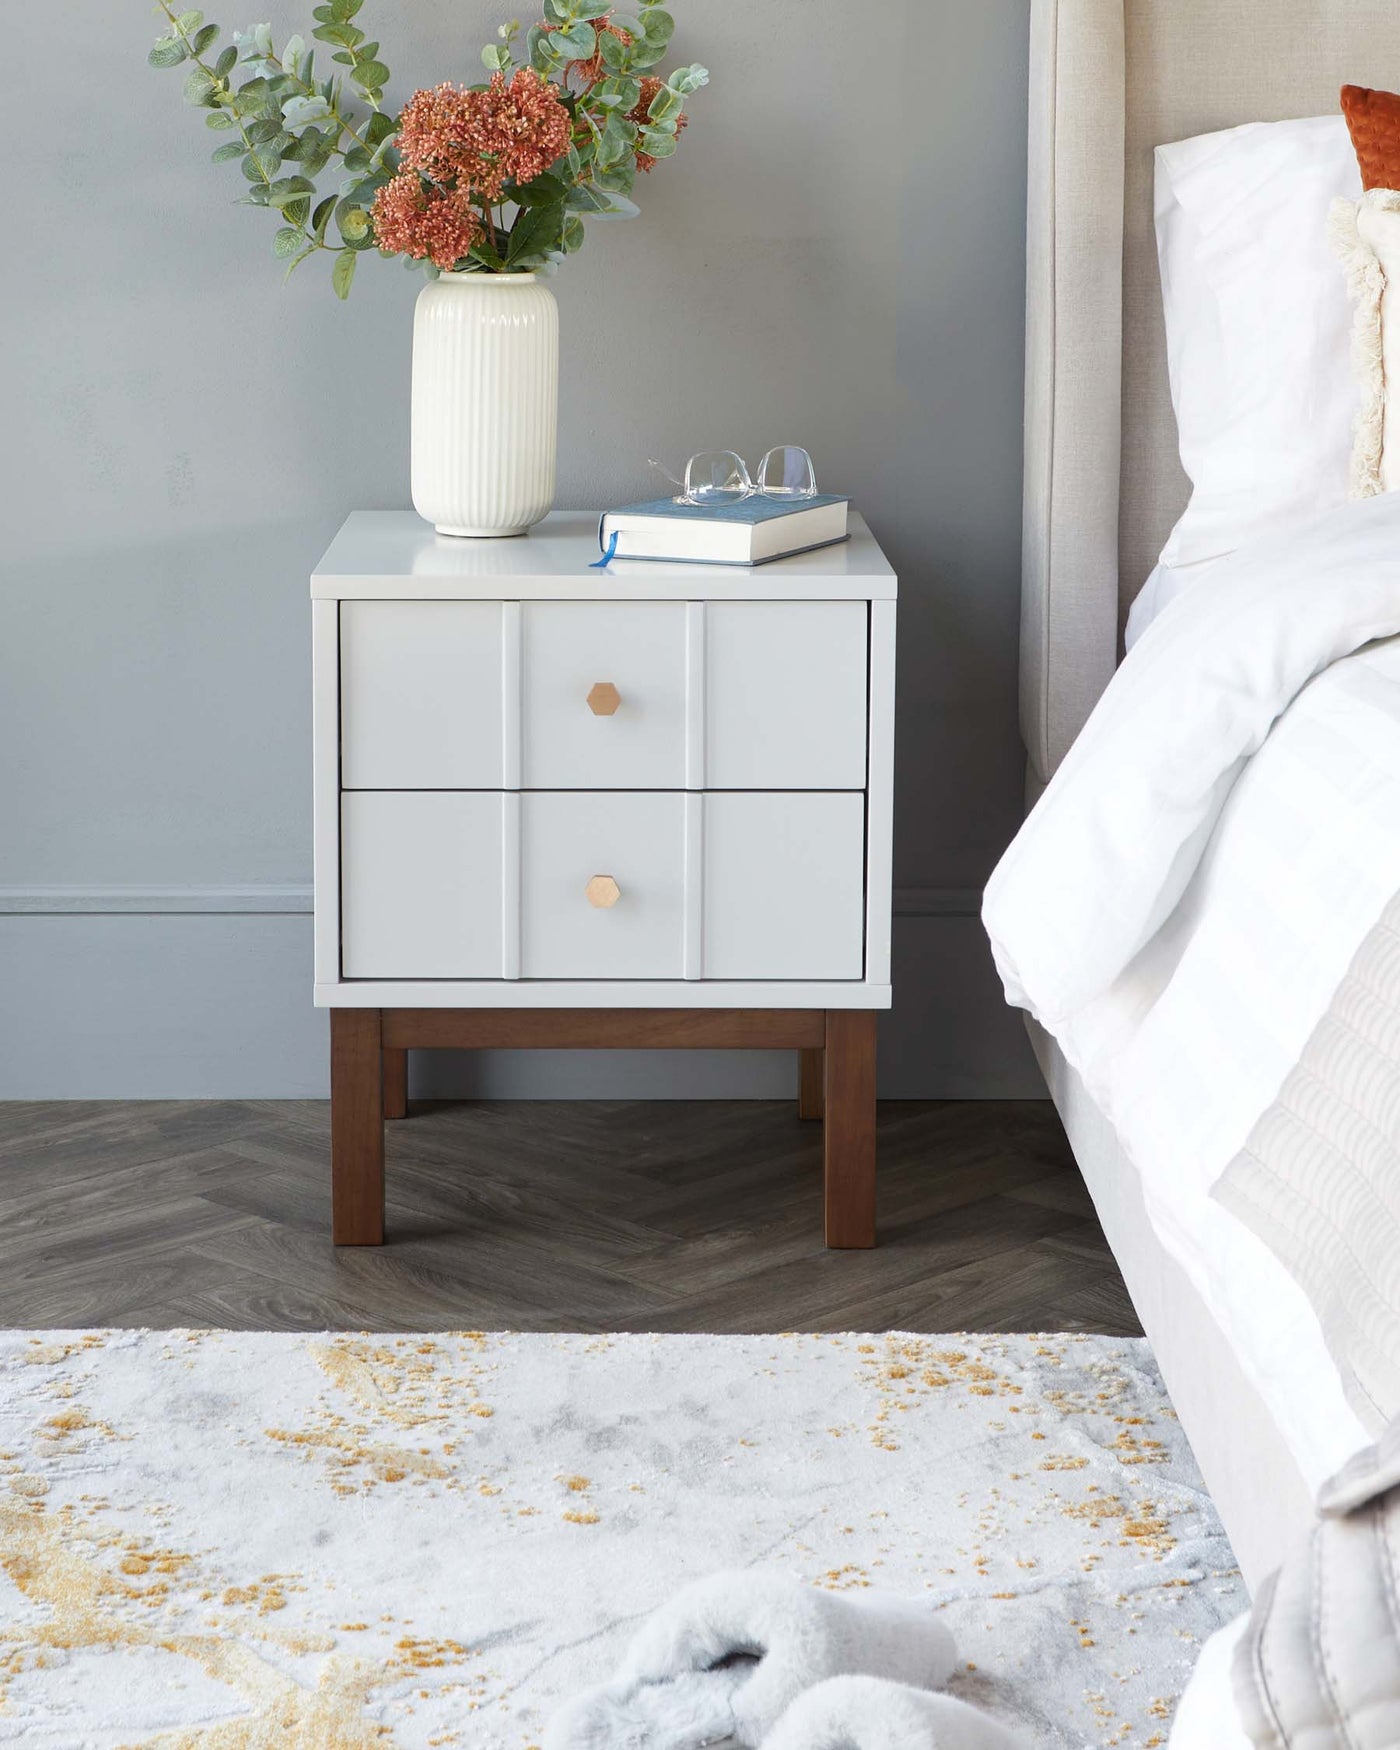 Modern minimalist white bedside table with a wooden leg base, featuring two drawers with round wooden knobs. Positioned next to a bed with white linen, the table holds a vase of flowers, a pair of glasses, and a book. A plush grey and yellow patterned rug is partially visible on the floor.